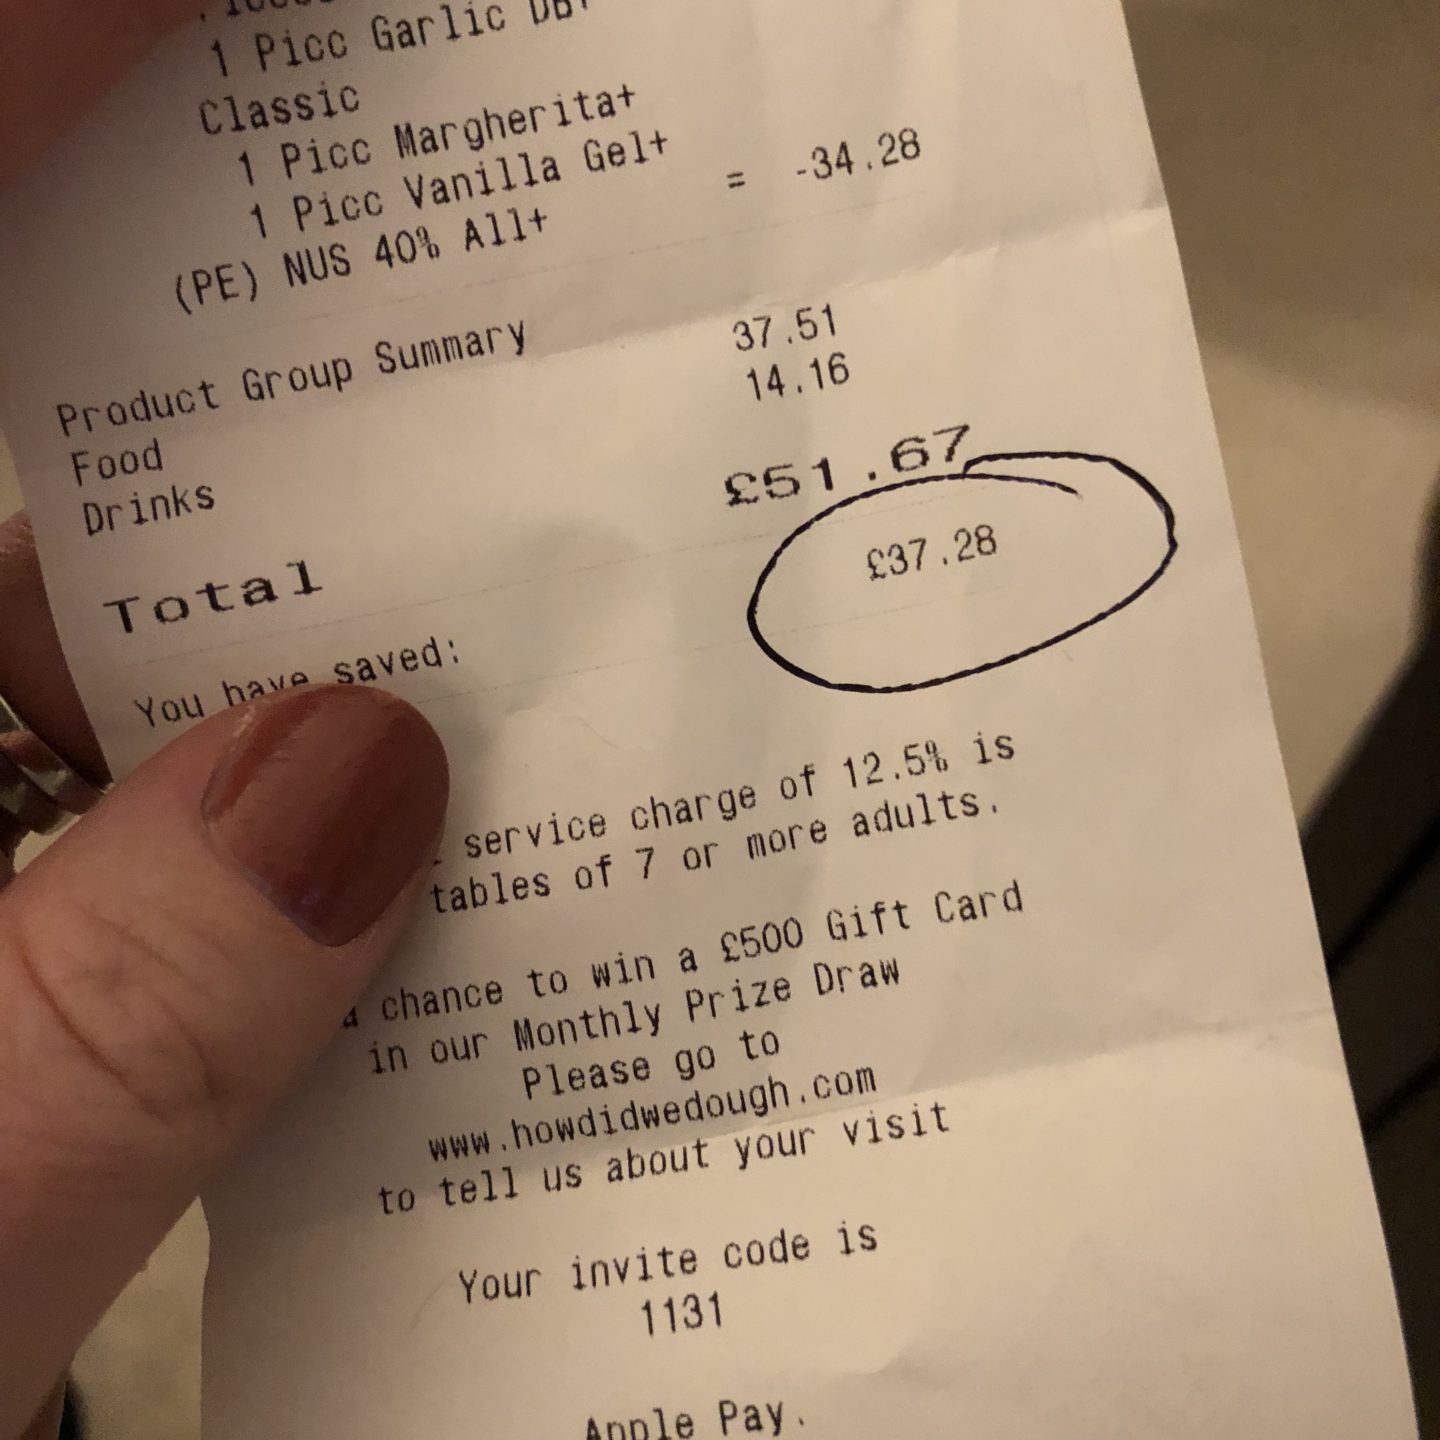 Lunch receipt with 40% cut off